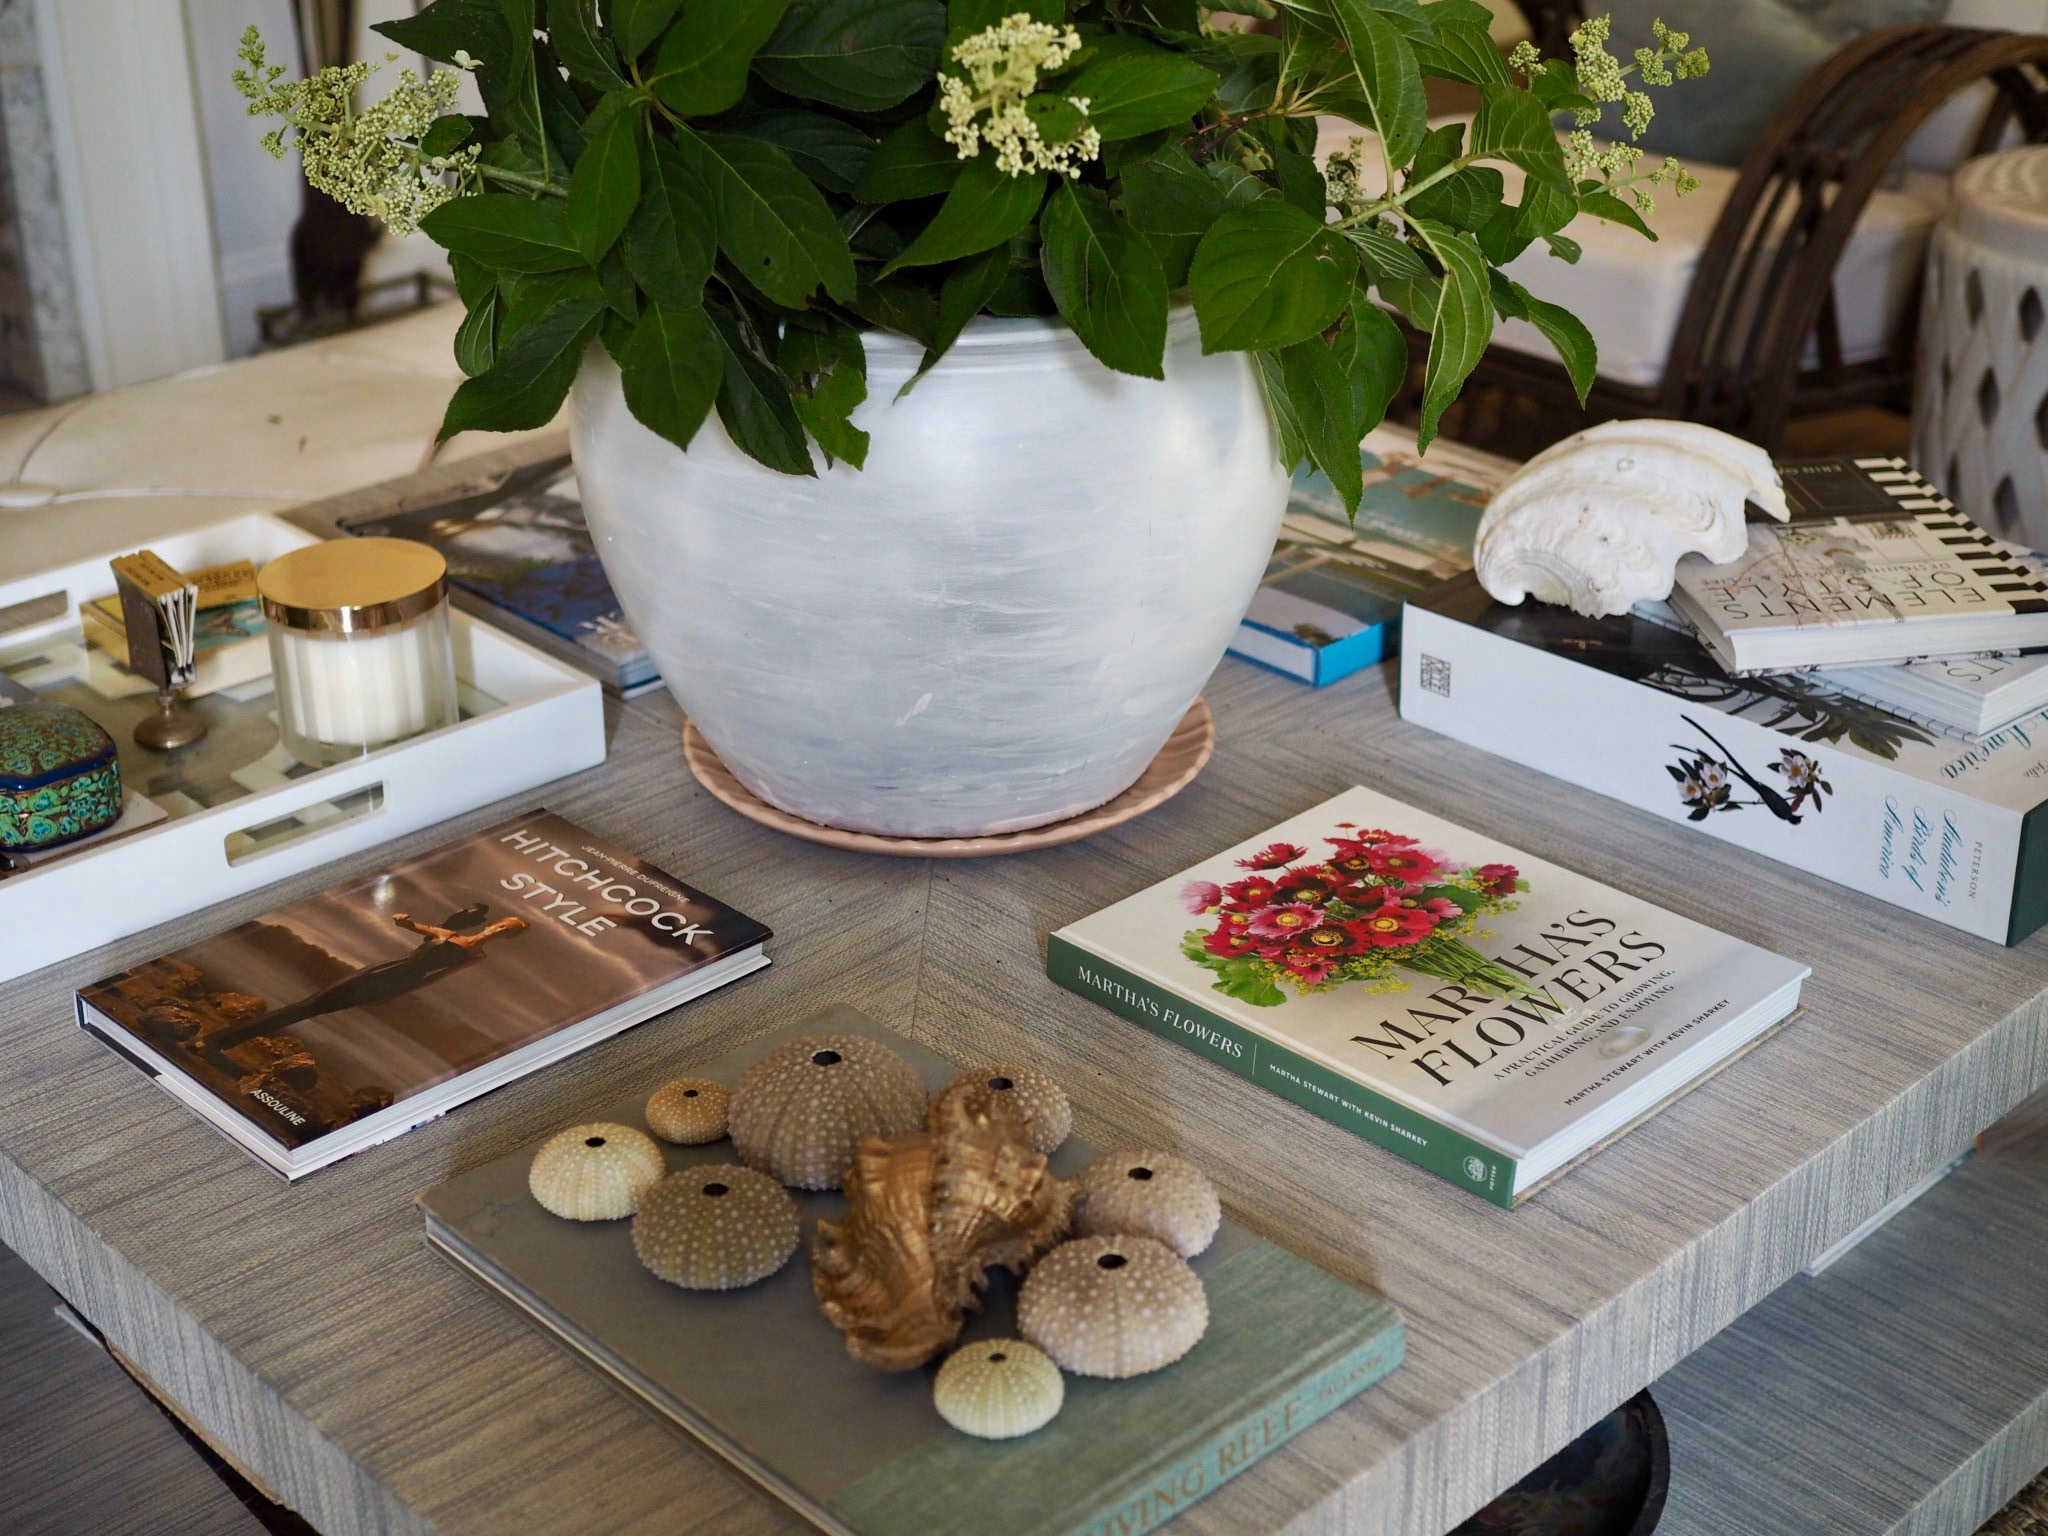 My Favorite Coffee Table Books (That I Actually Read) | @beesandbubbles